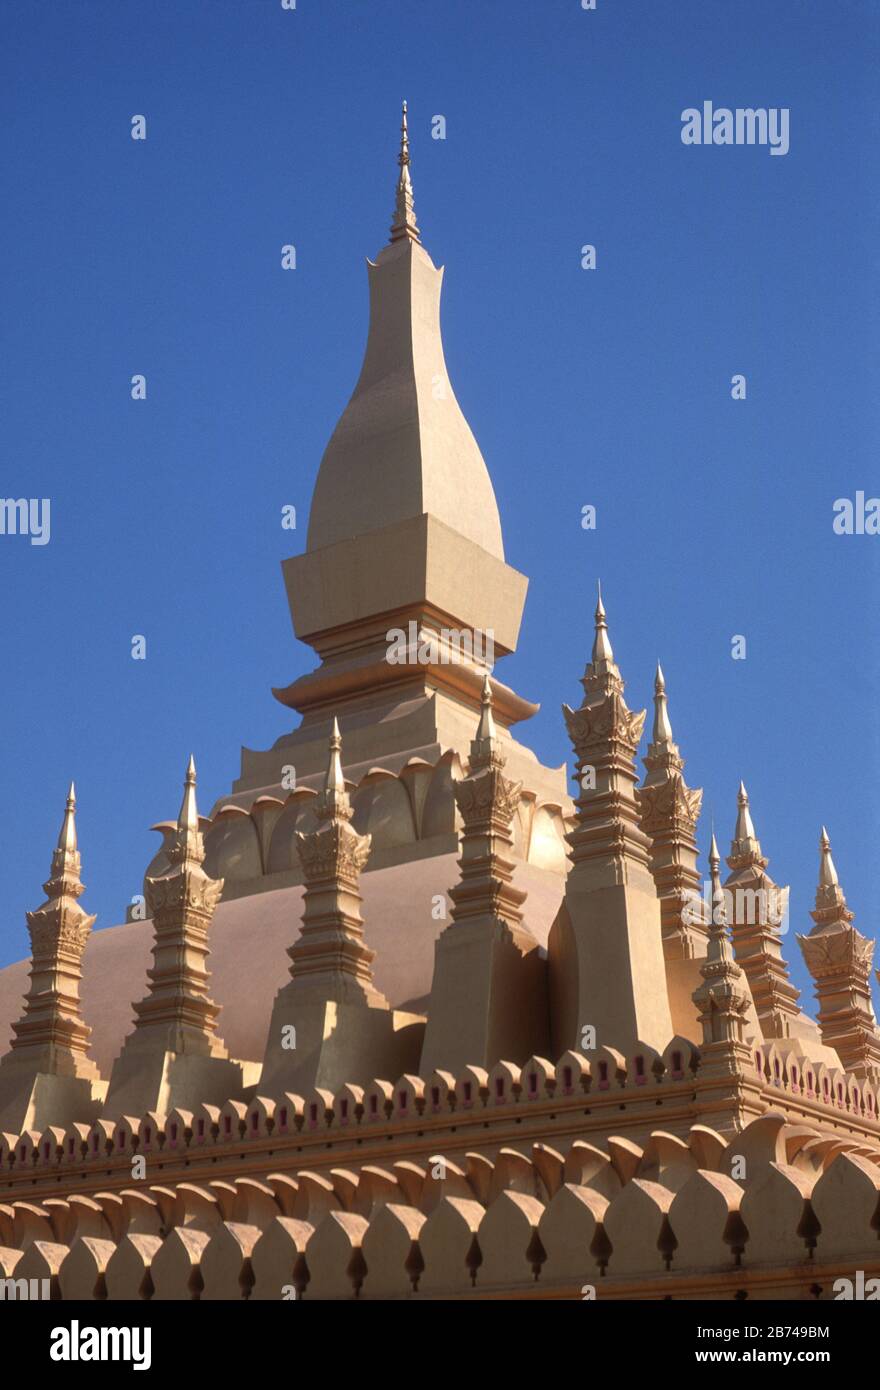 Pha That Luang (the Great Stupa) in Vientiane, Laos. The gold-covered Buddhist stupa was probably first built in the 3rd century, but rebuilt several times since. Stock Photo